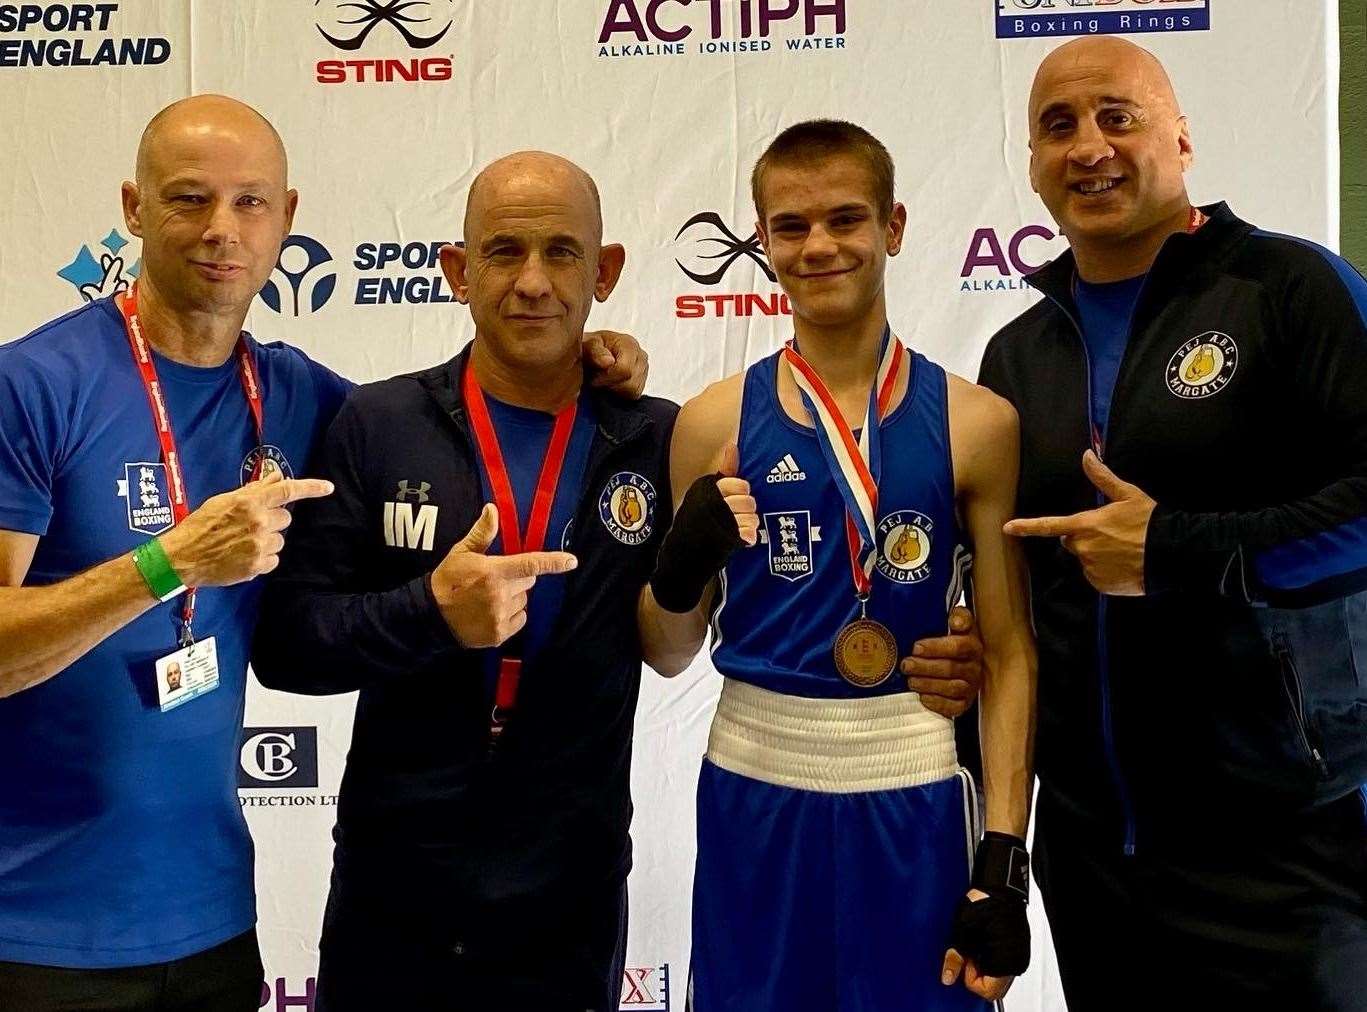 Michael Chipps, pictured with PEJ ABC Margate coaches, had to settle for bronze